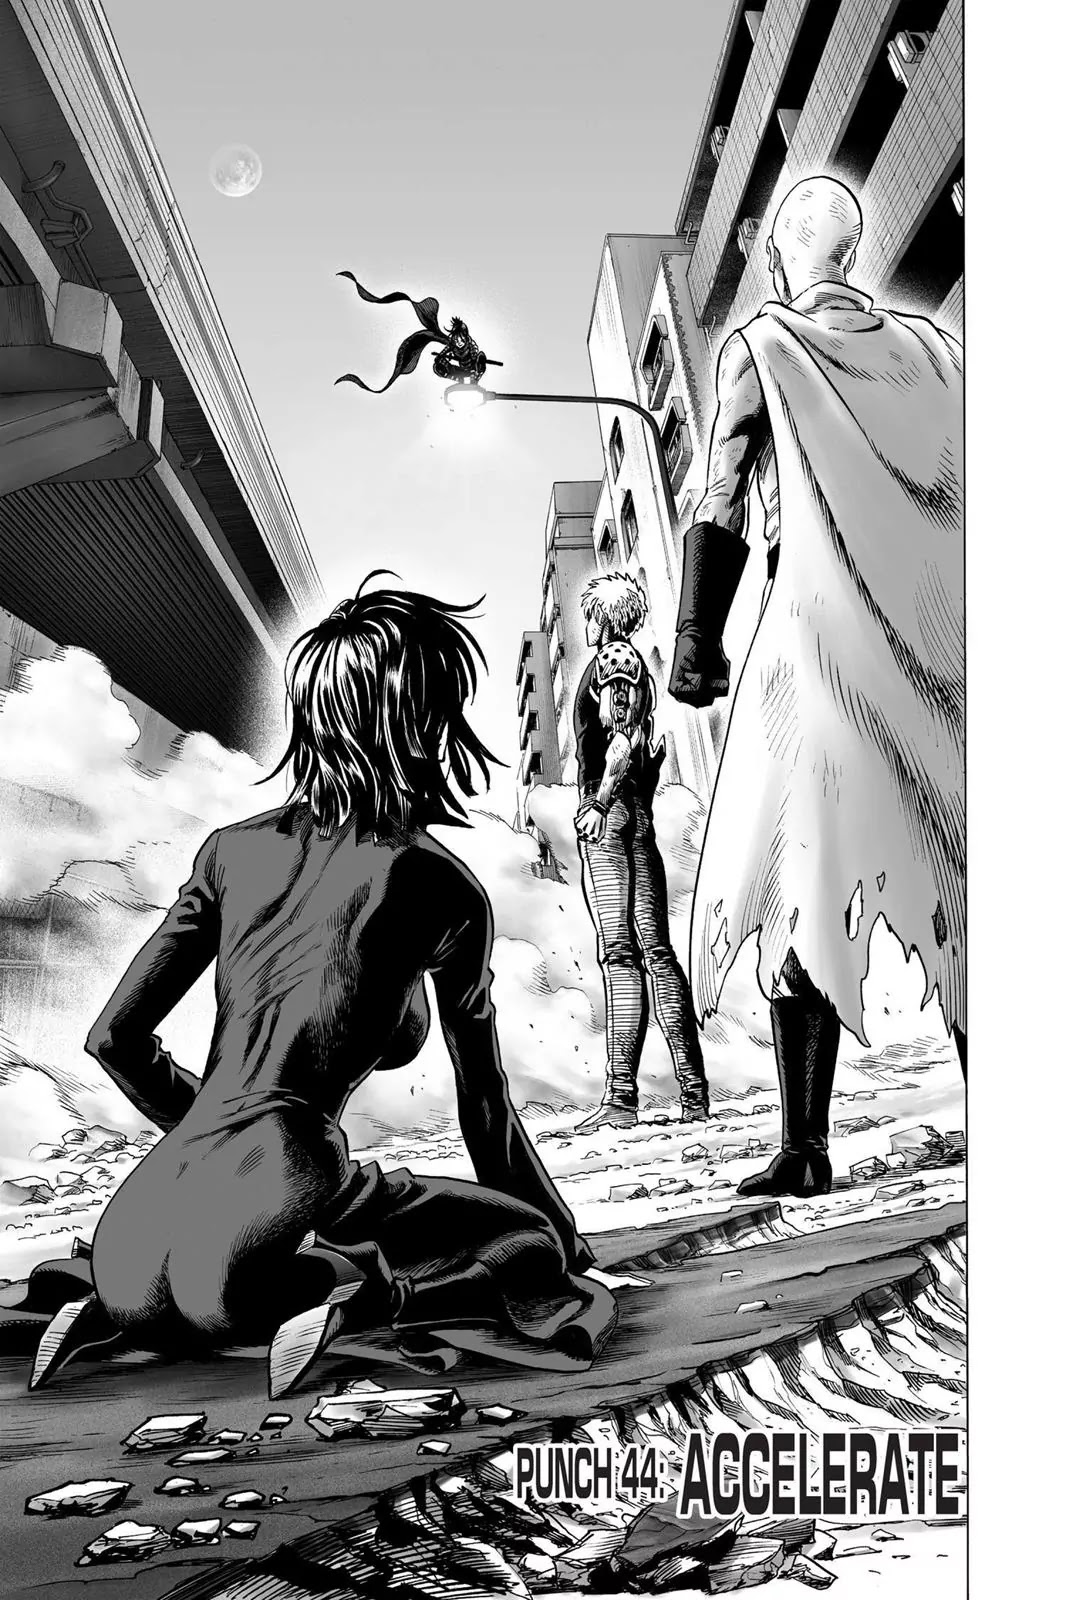 One Punch Man, Chapter 44 Accelerate image 01